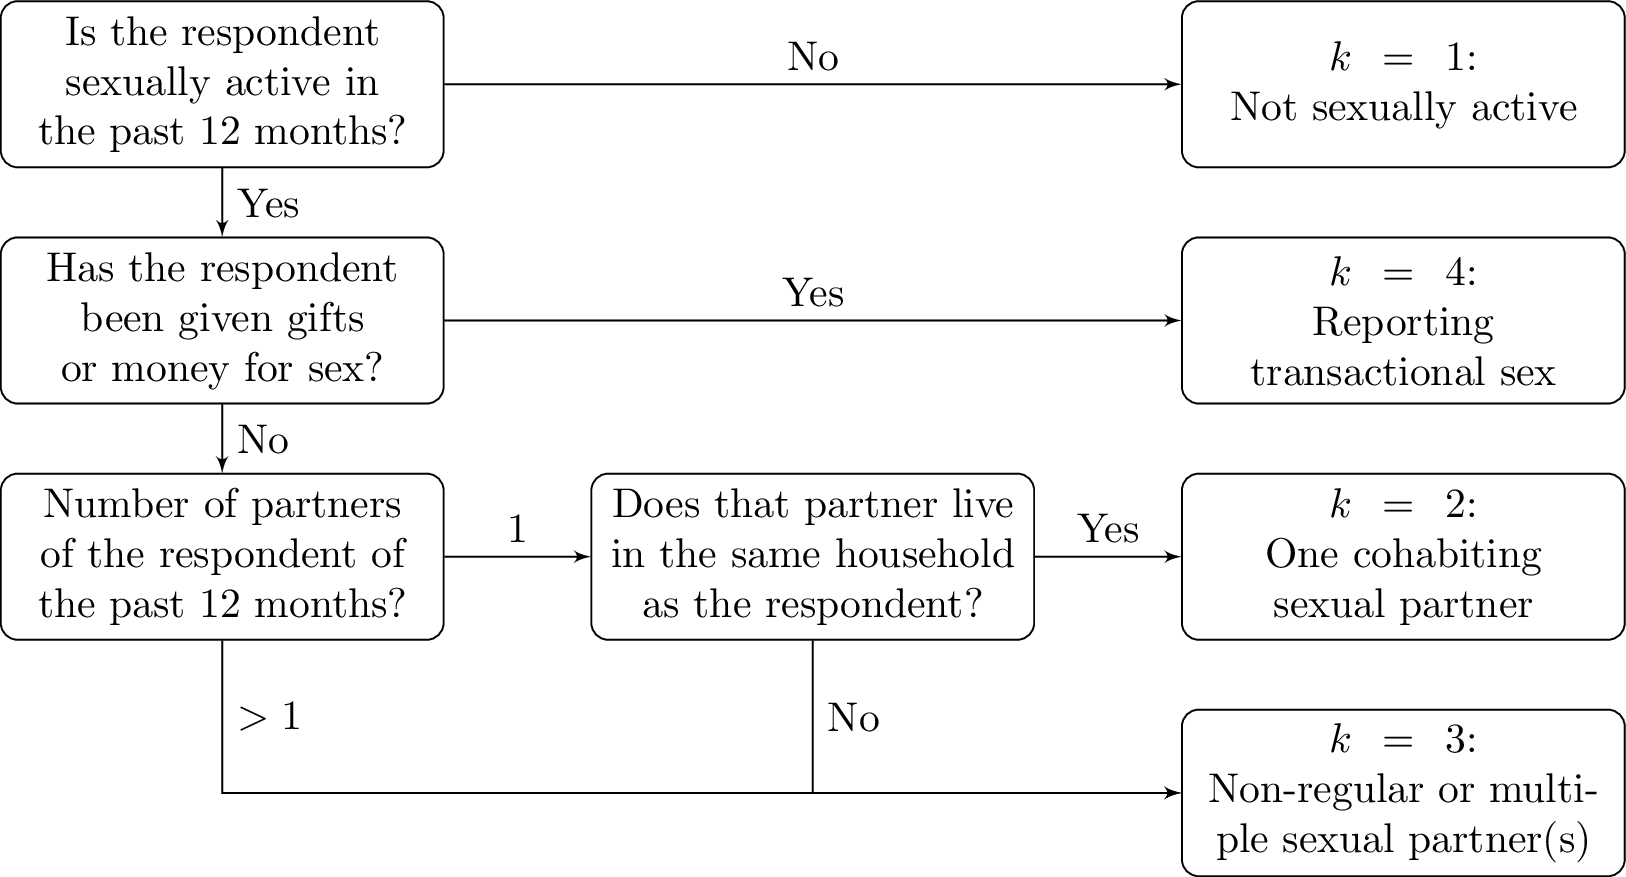 Flowchart describing how respondents were classified to HIV risk groups based on their survey responses.